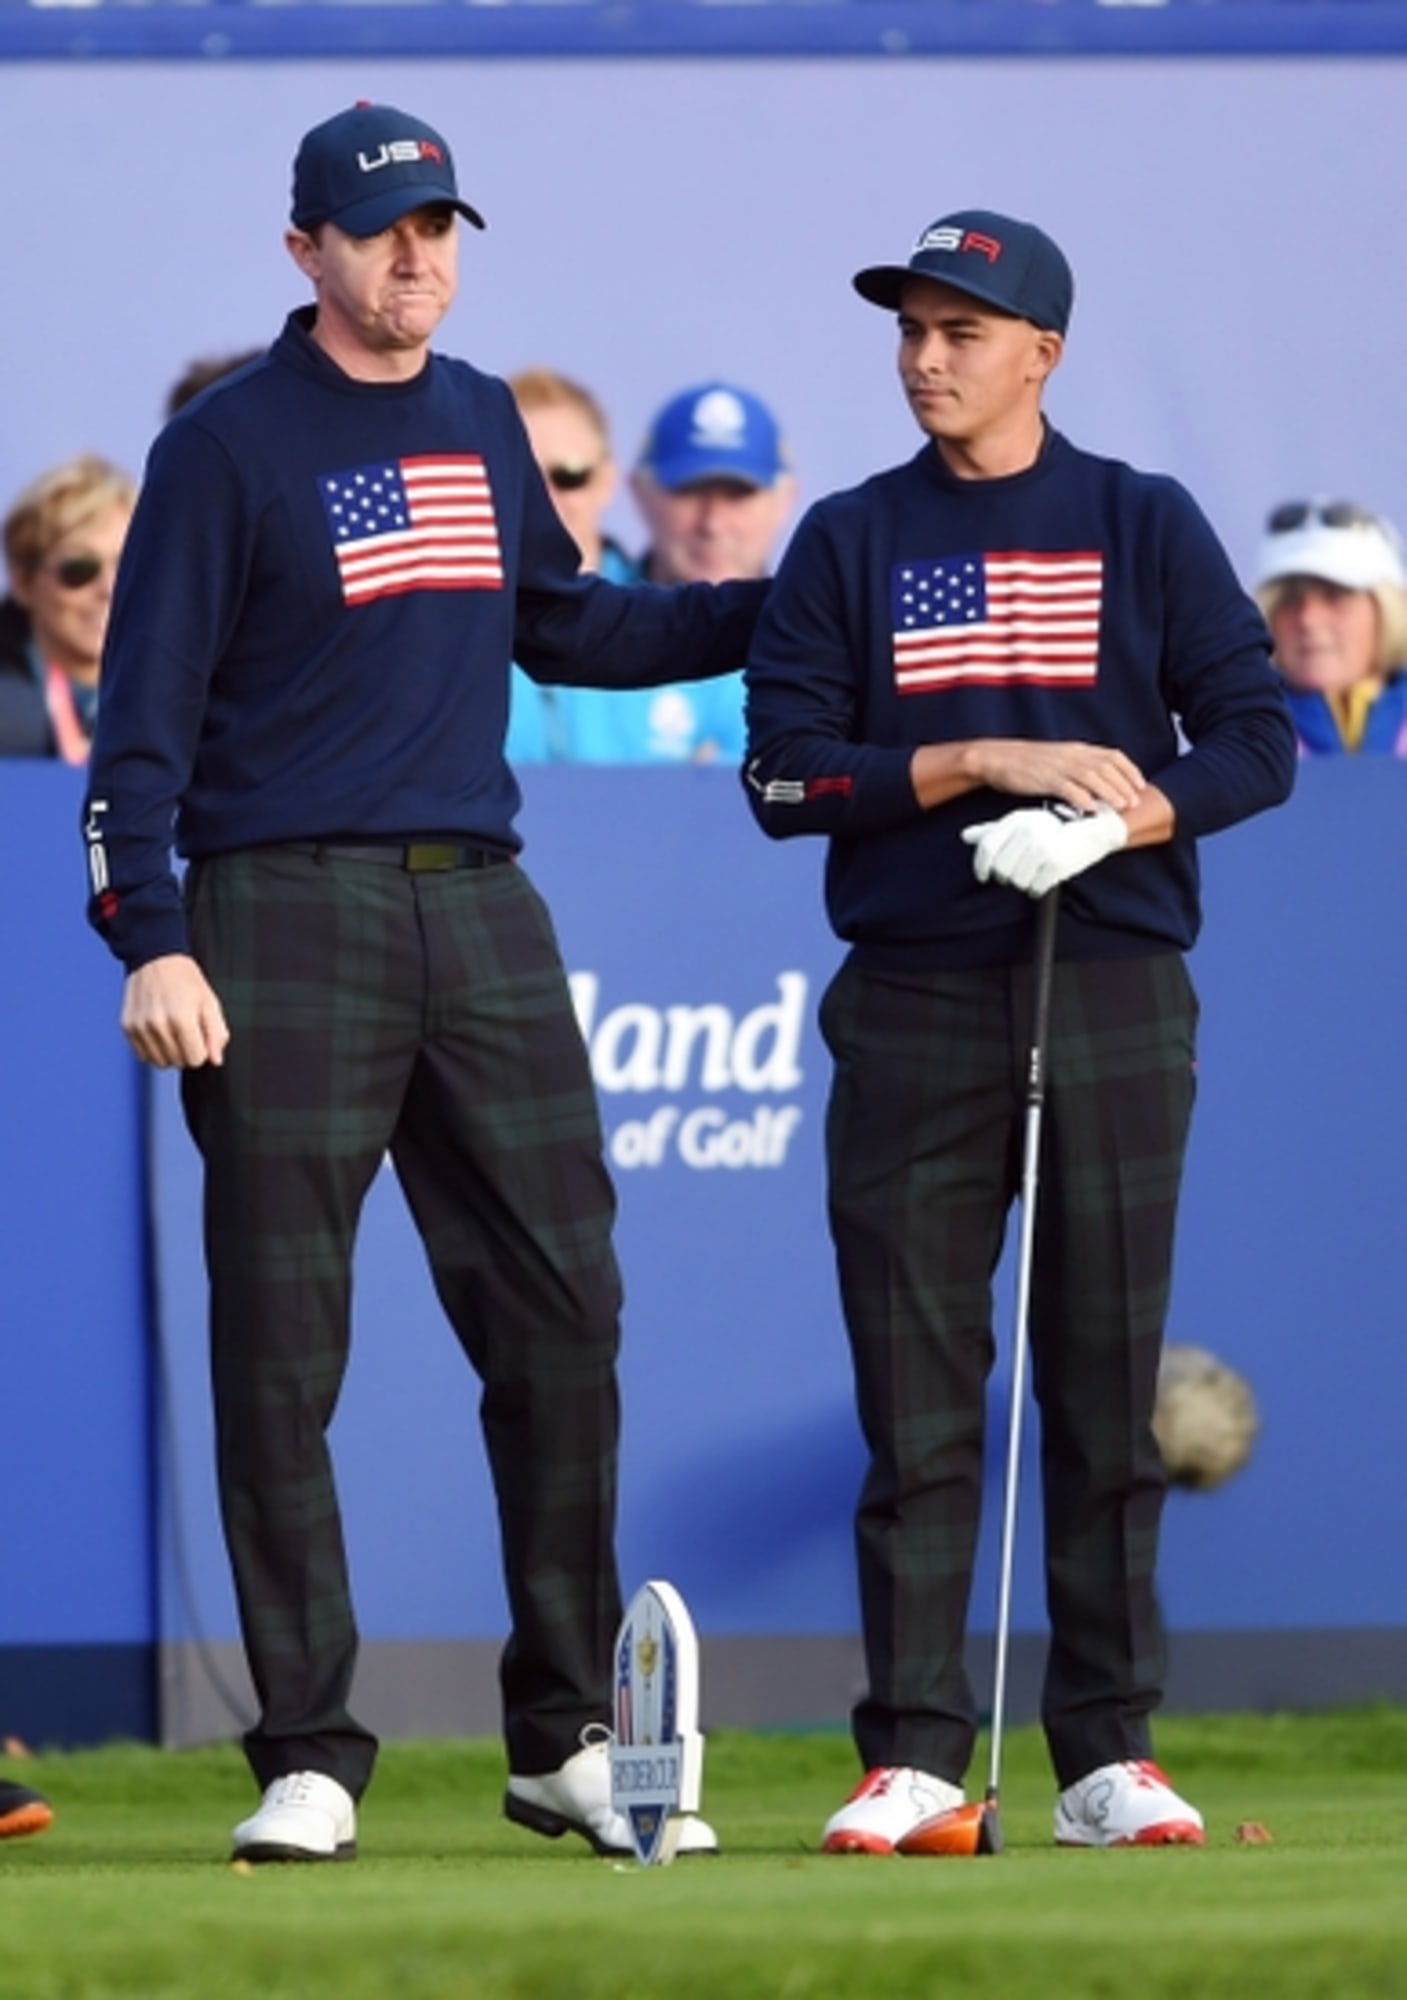 Ryder Cup Rickie Fowler and Jimmy Walker halve with Rory McIlroy and